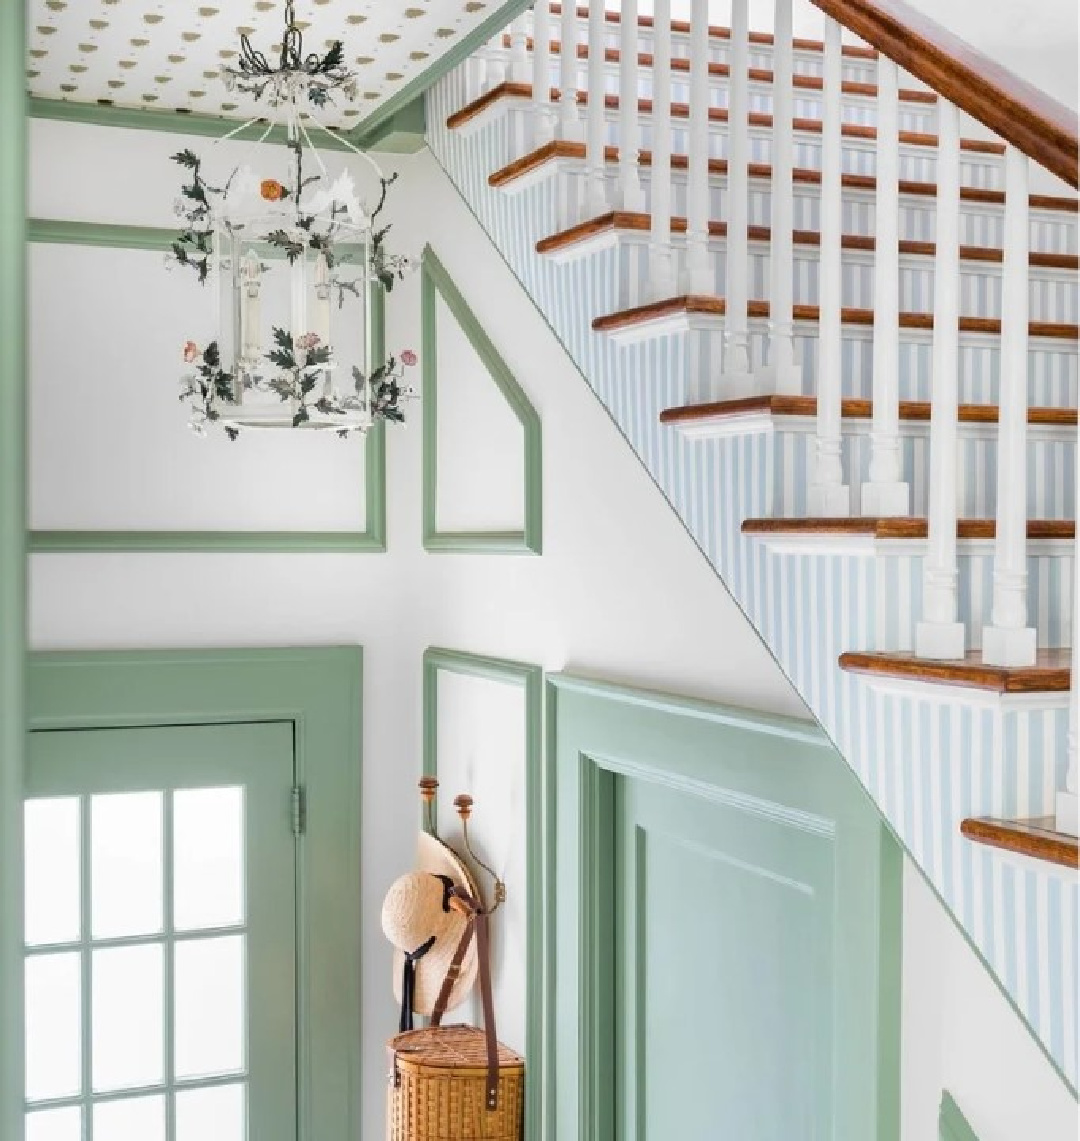 Farrow & Ball Breakfast Room Green painted trim in a whimsical entry with staircase - @astoriedstyle. #breakfastroomgreen